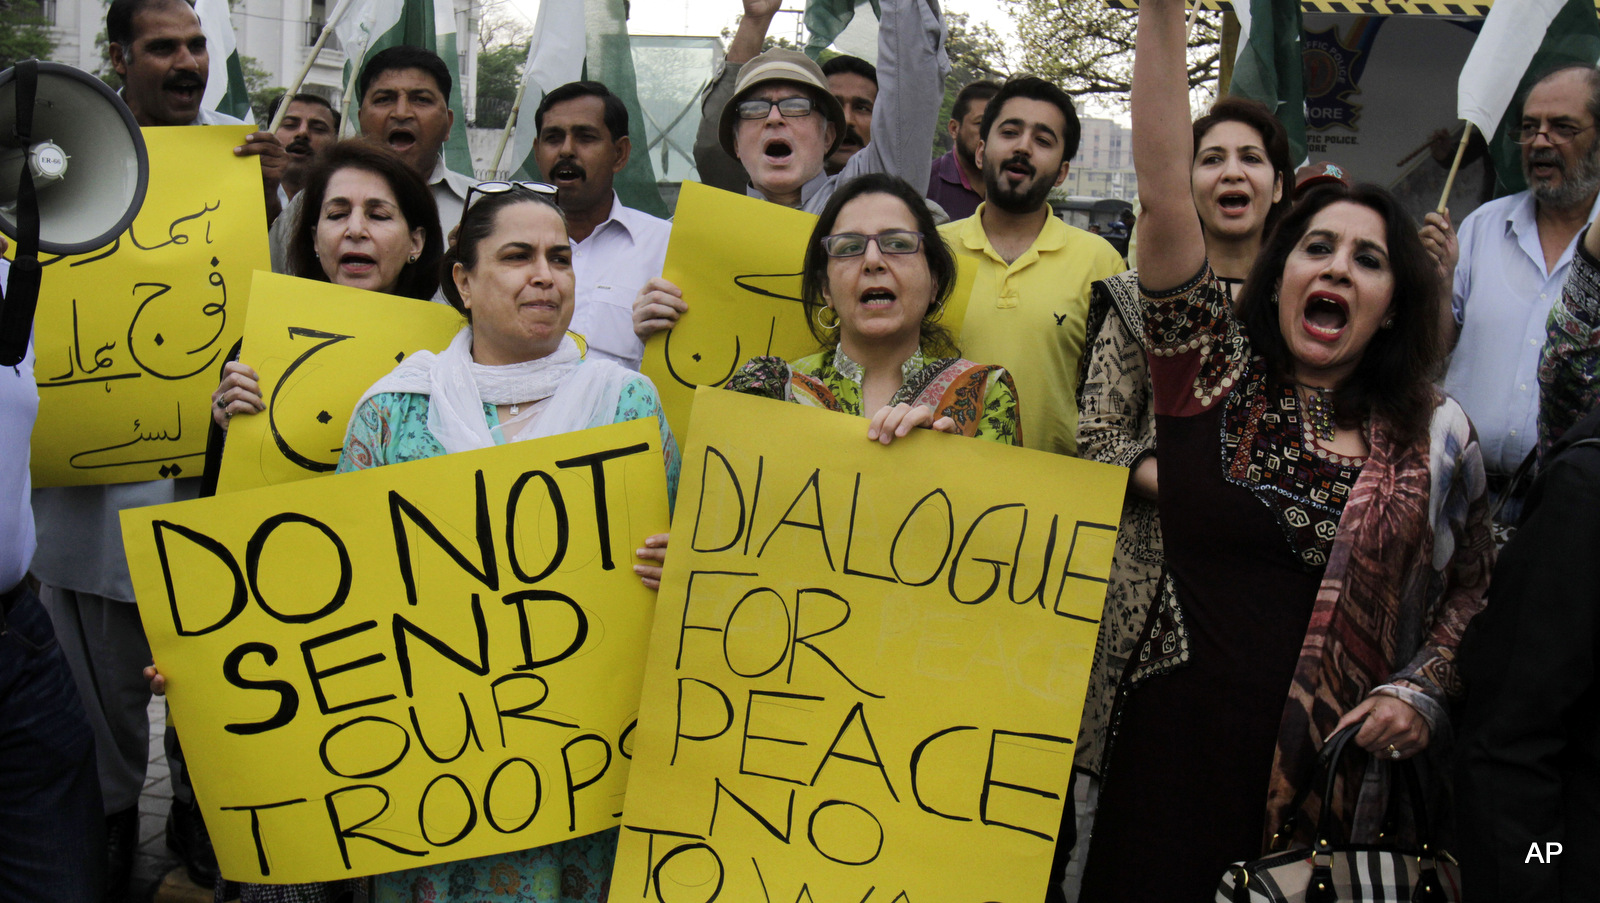 Members of Pakistan's civil society chant slogans against the Saudi-led coalition targeting Shiite rebels in Yemen, during a demonstration, in Lahore, Pakistan, Monday, April 6, 2015. A Saudi-led coalition targeting Shiite rebels in Yemen has asked Pakistan to contribute soldiers, Pakistan's defense minister said Monday, raising the possibility of a ground offensive in the country.